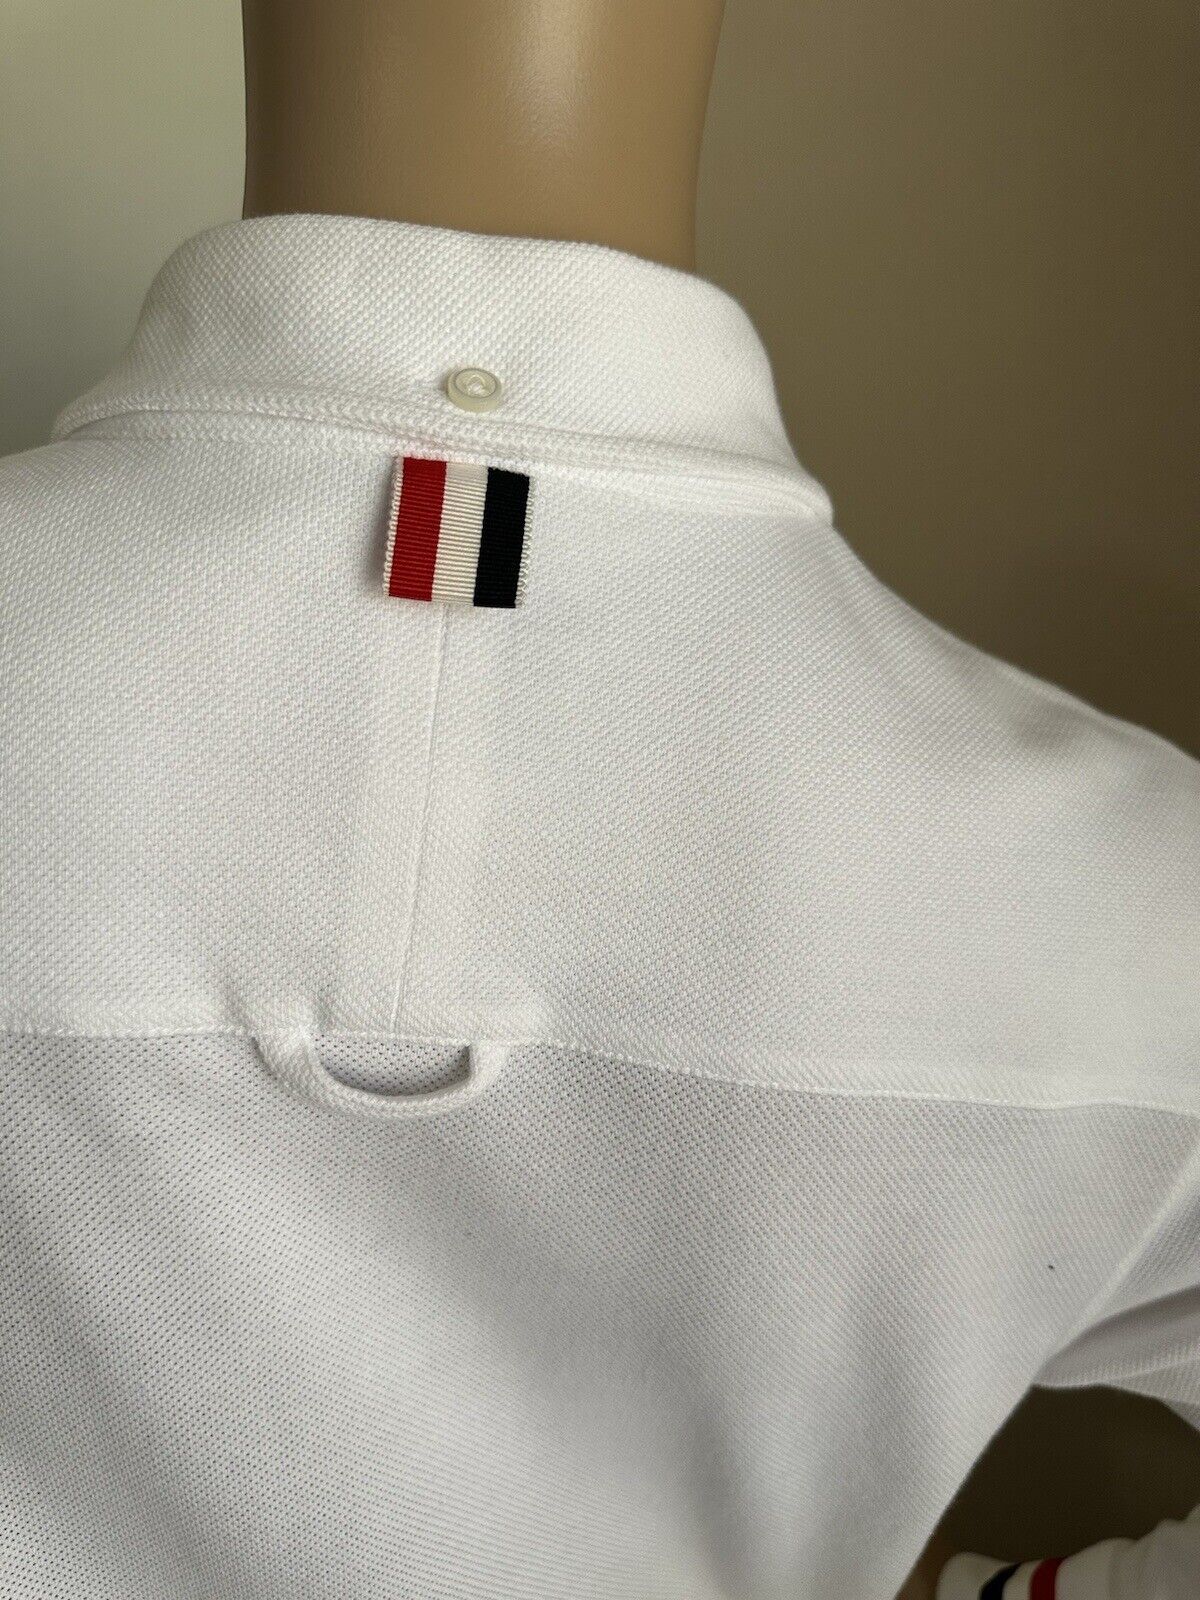 New $1890 Thom Browne Dress White Size 42/6 Italy